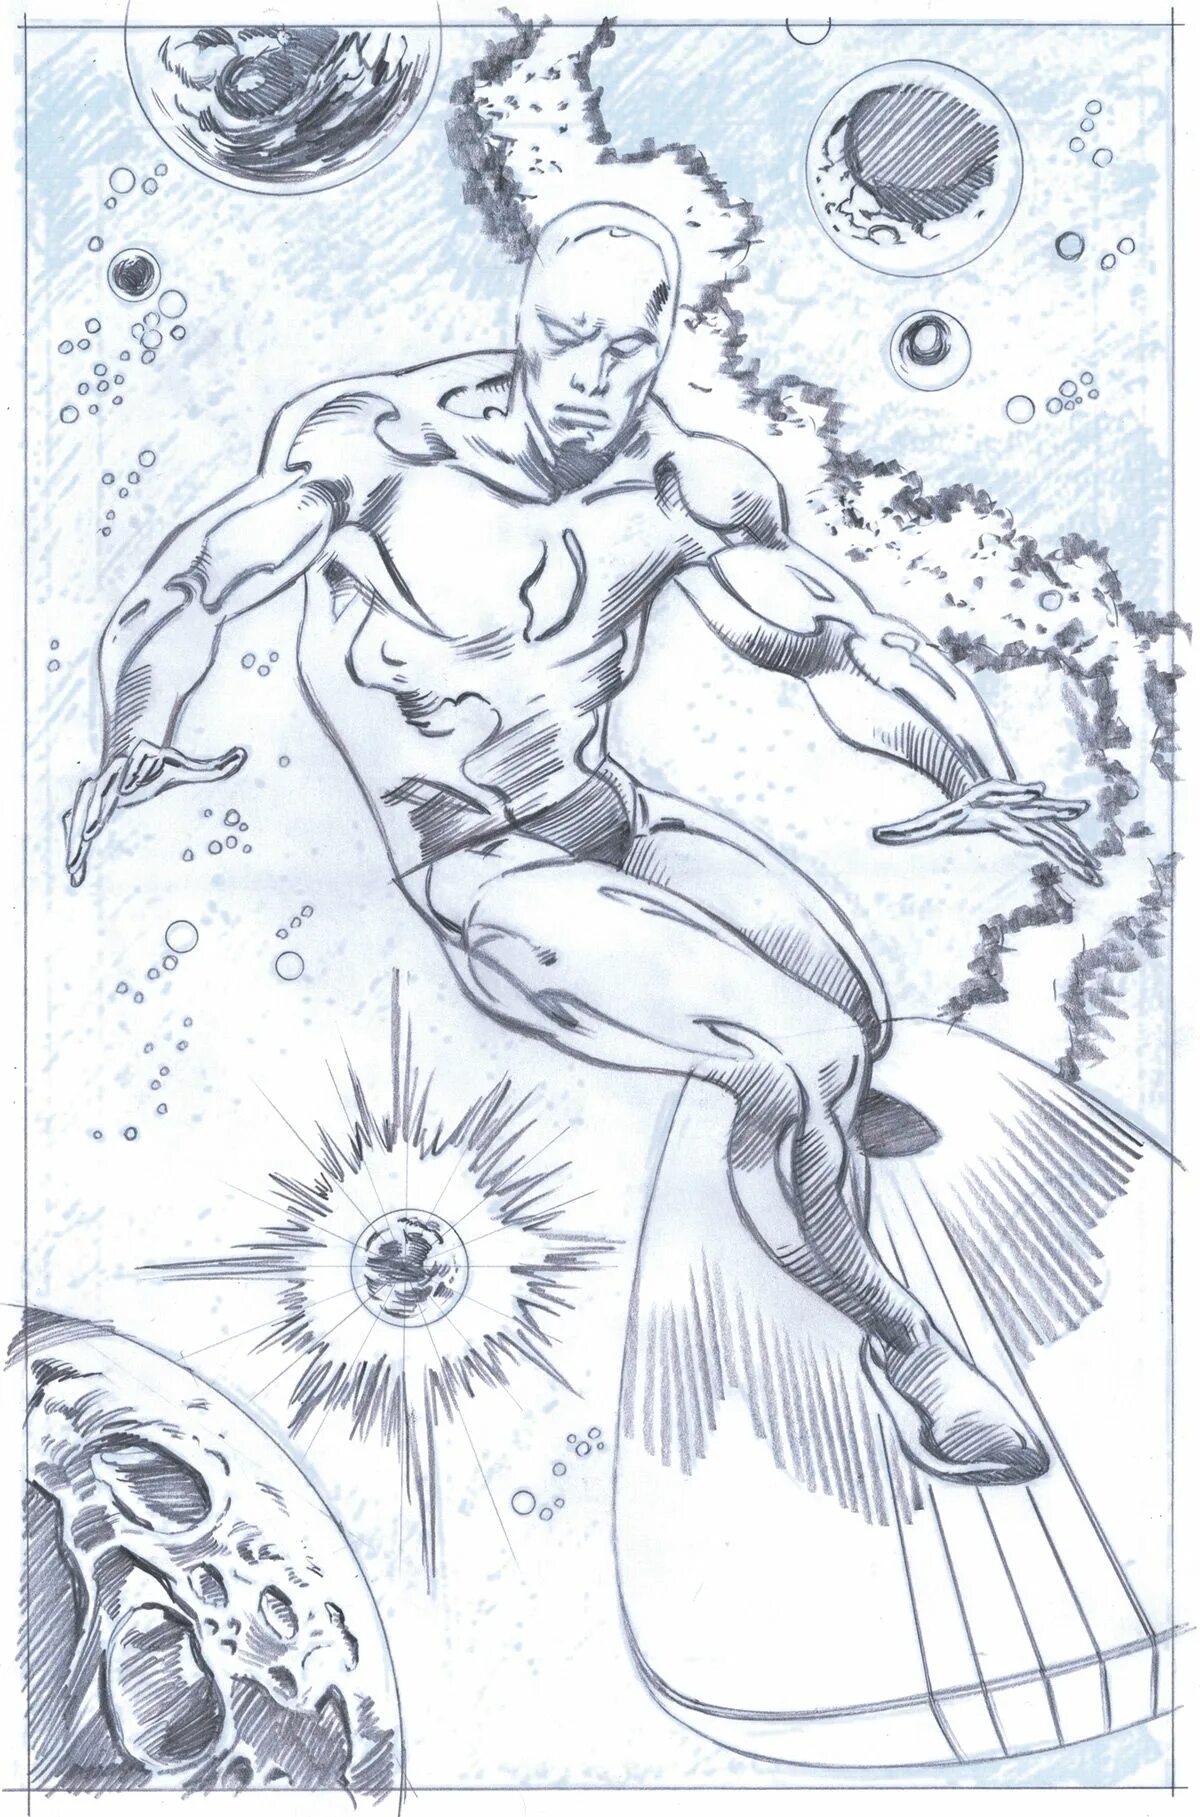 Coloring silver surfer with rich shades